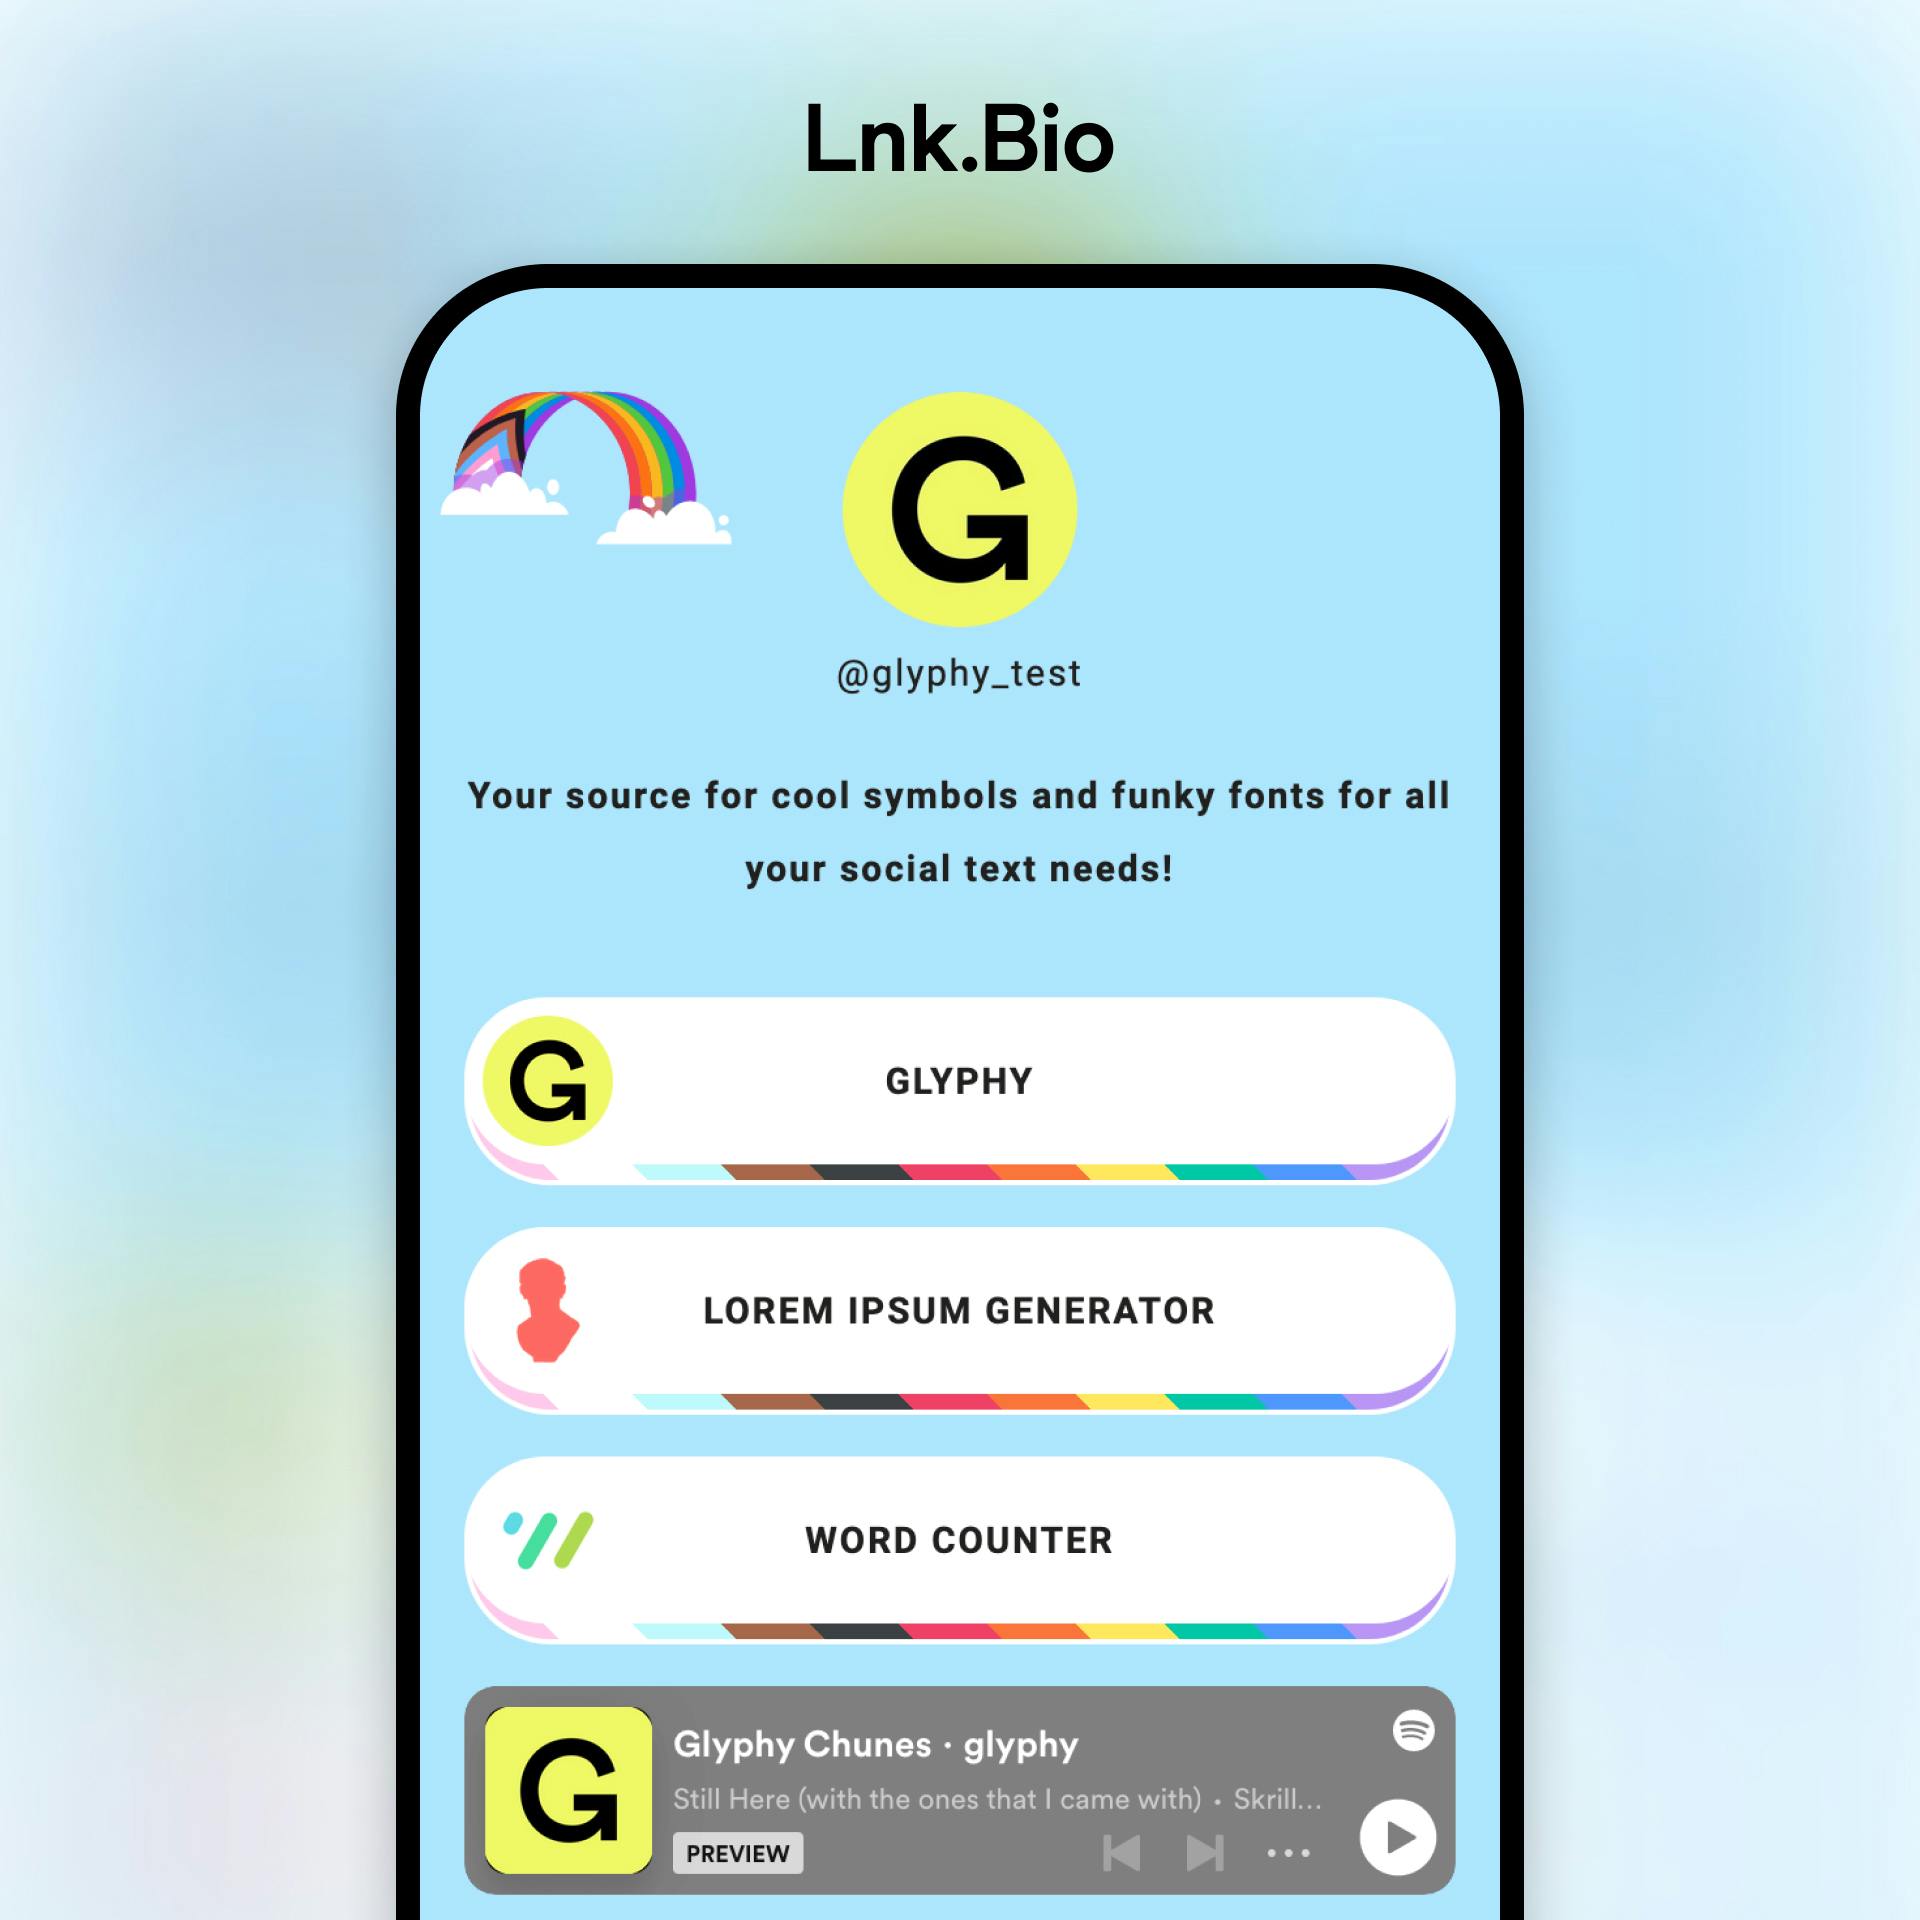 Lnk.Bio link in bio tool example profile on a mobile device